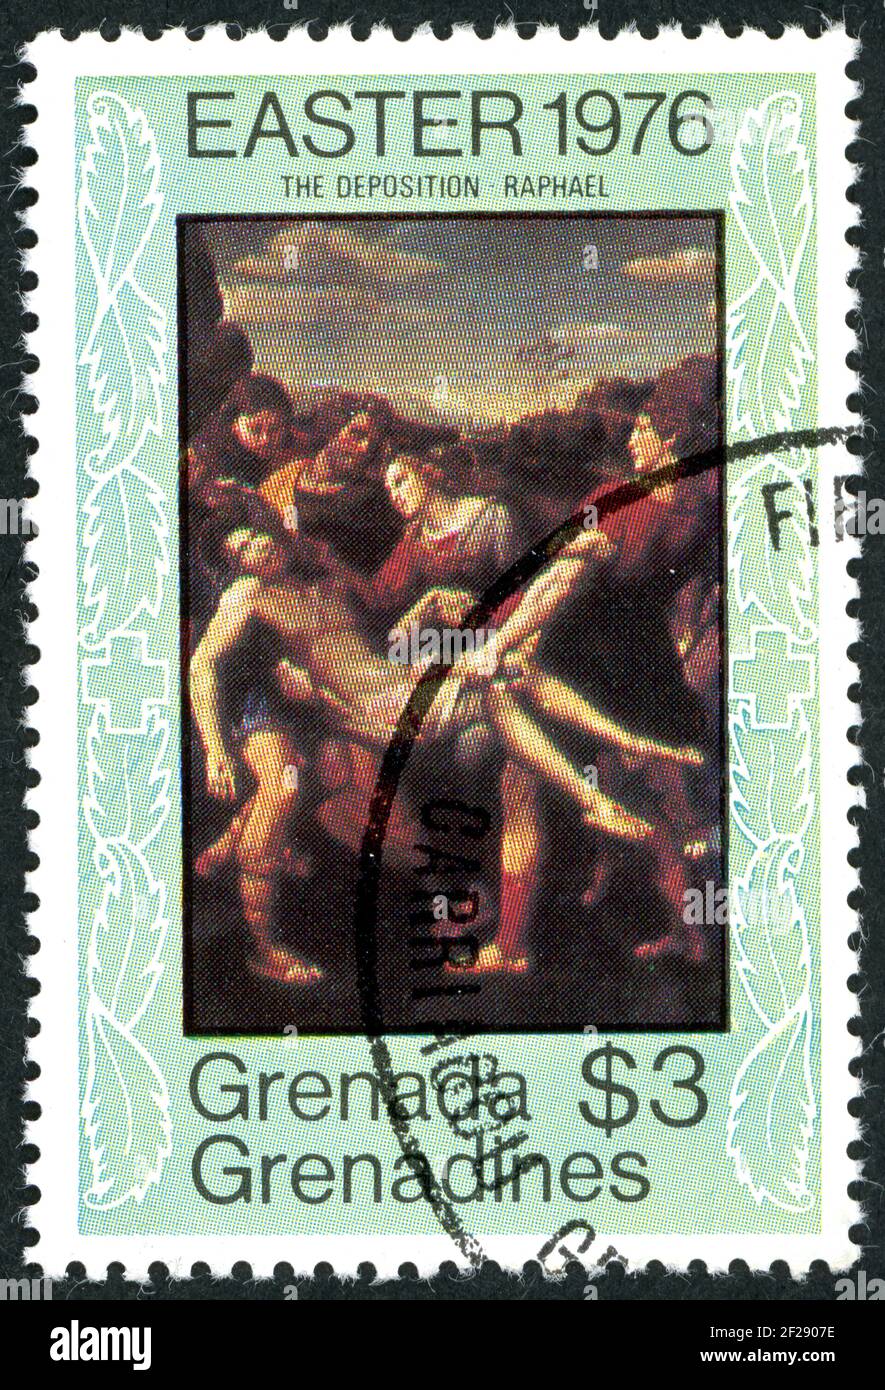 GRENADA GRENADINES - CIRCA 1976: A stamp printed in Grenada Grenadines, Easter issue, shown the Deposition, by Raphael, circa 1976 Stock Photo